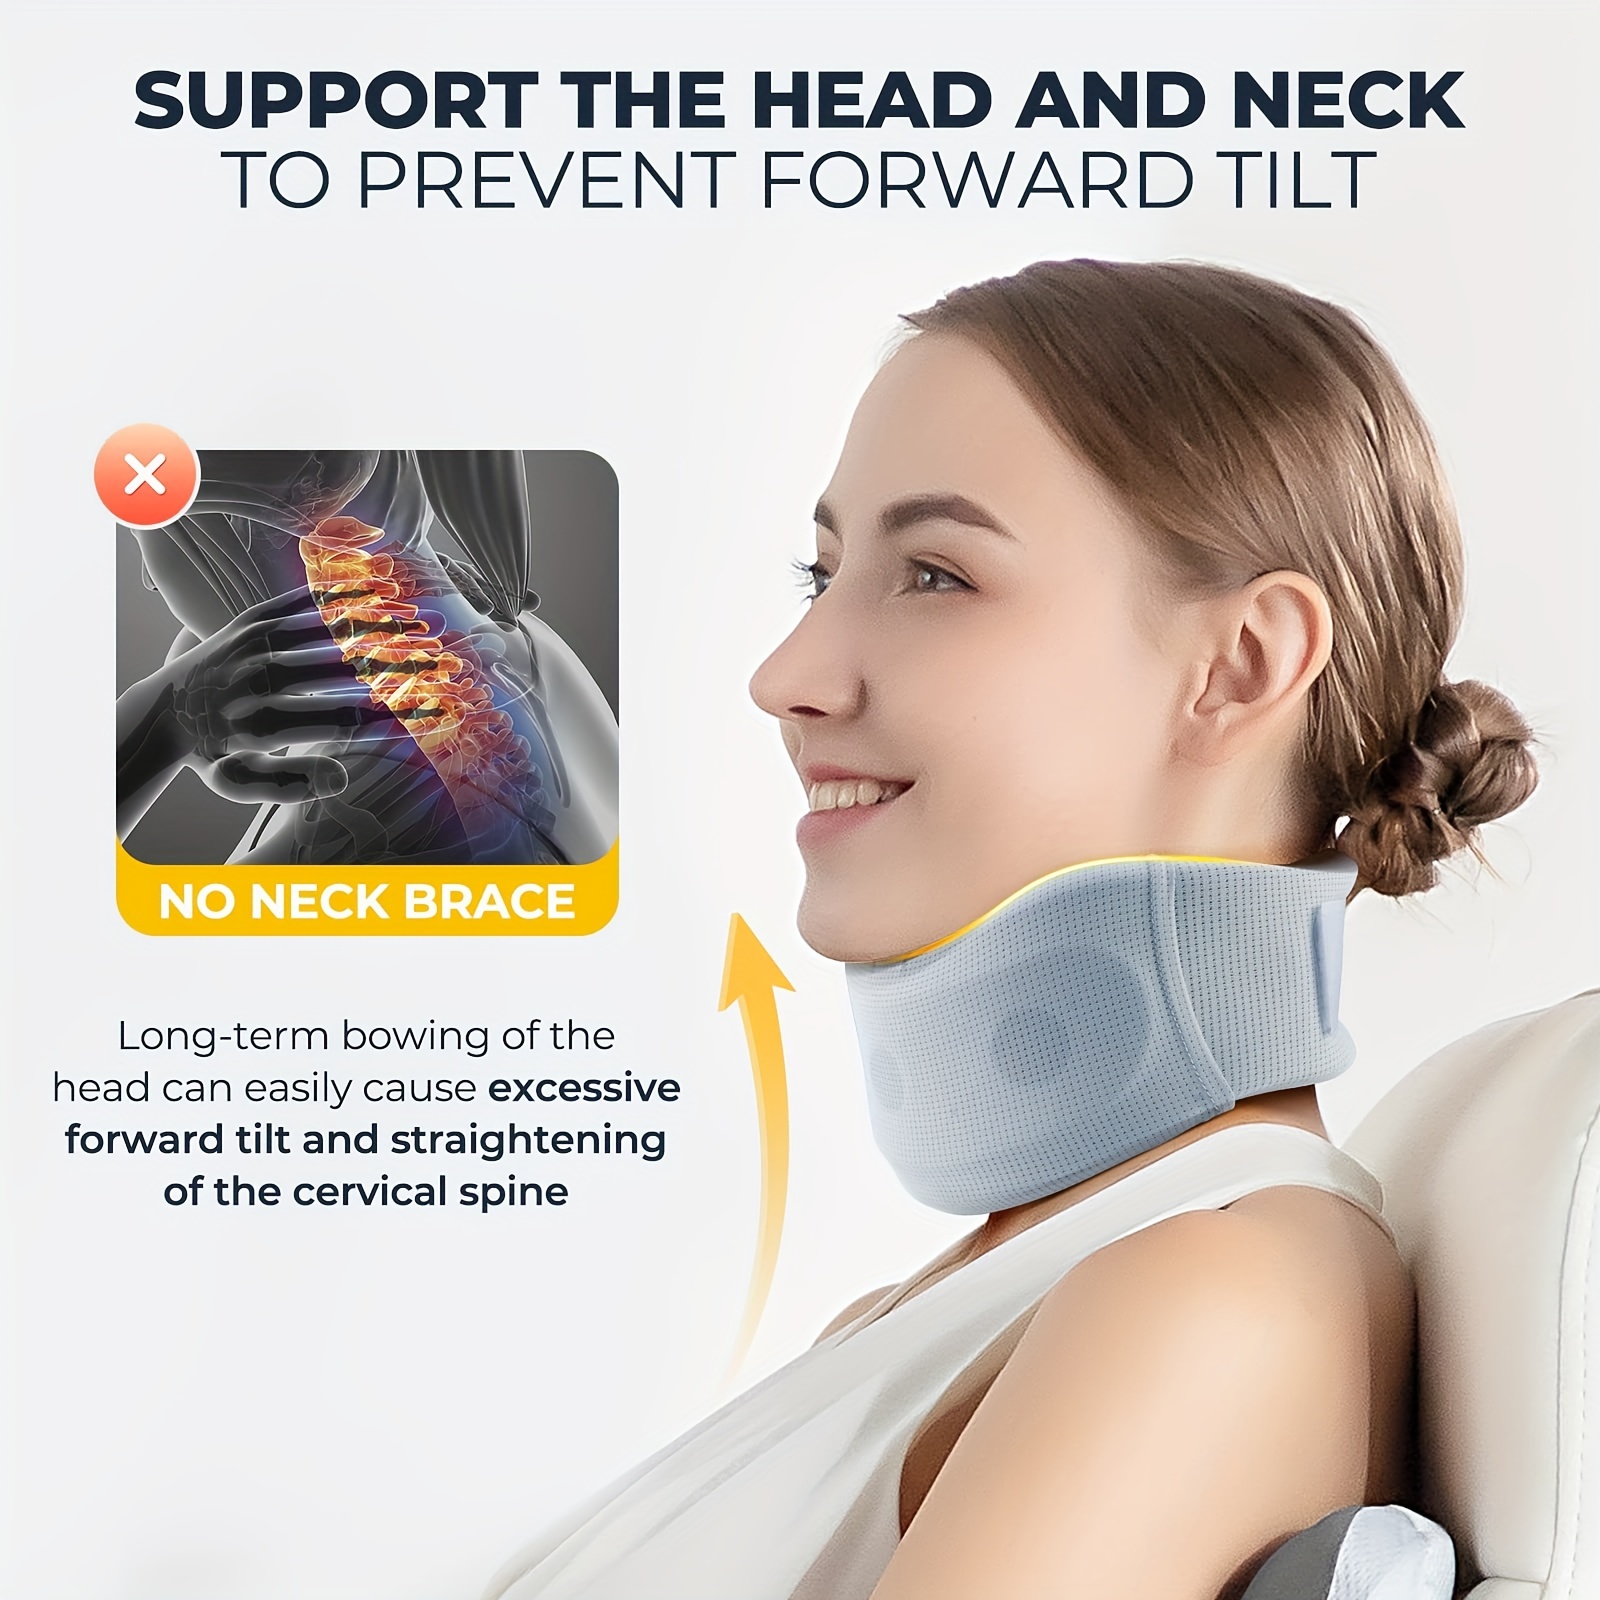 Soft Foam Neck Brace Universal Cervical Collar, Adjustable Neck Support  Brace For Sleeping - Relieves Neck Pain And Spine Pressure, Neck Collar  After